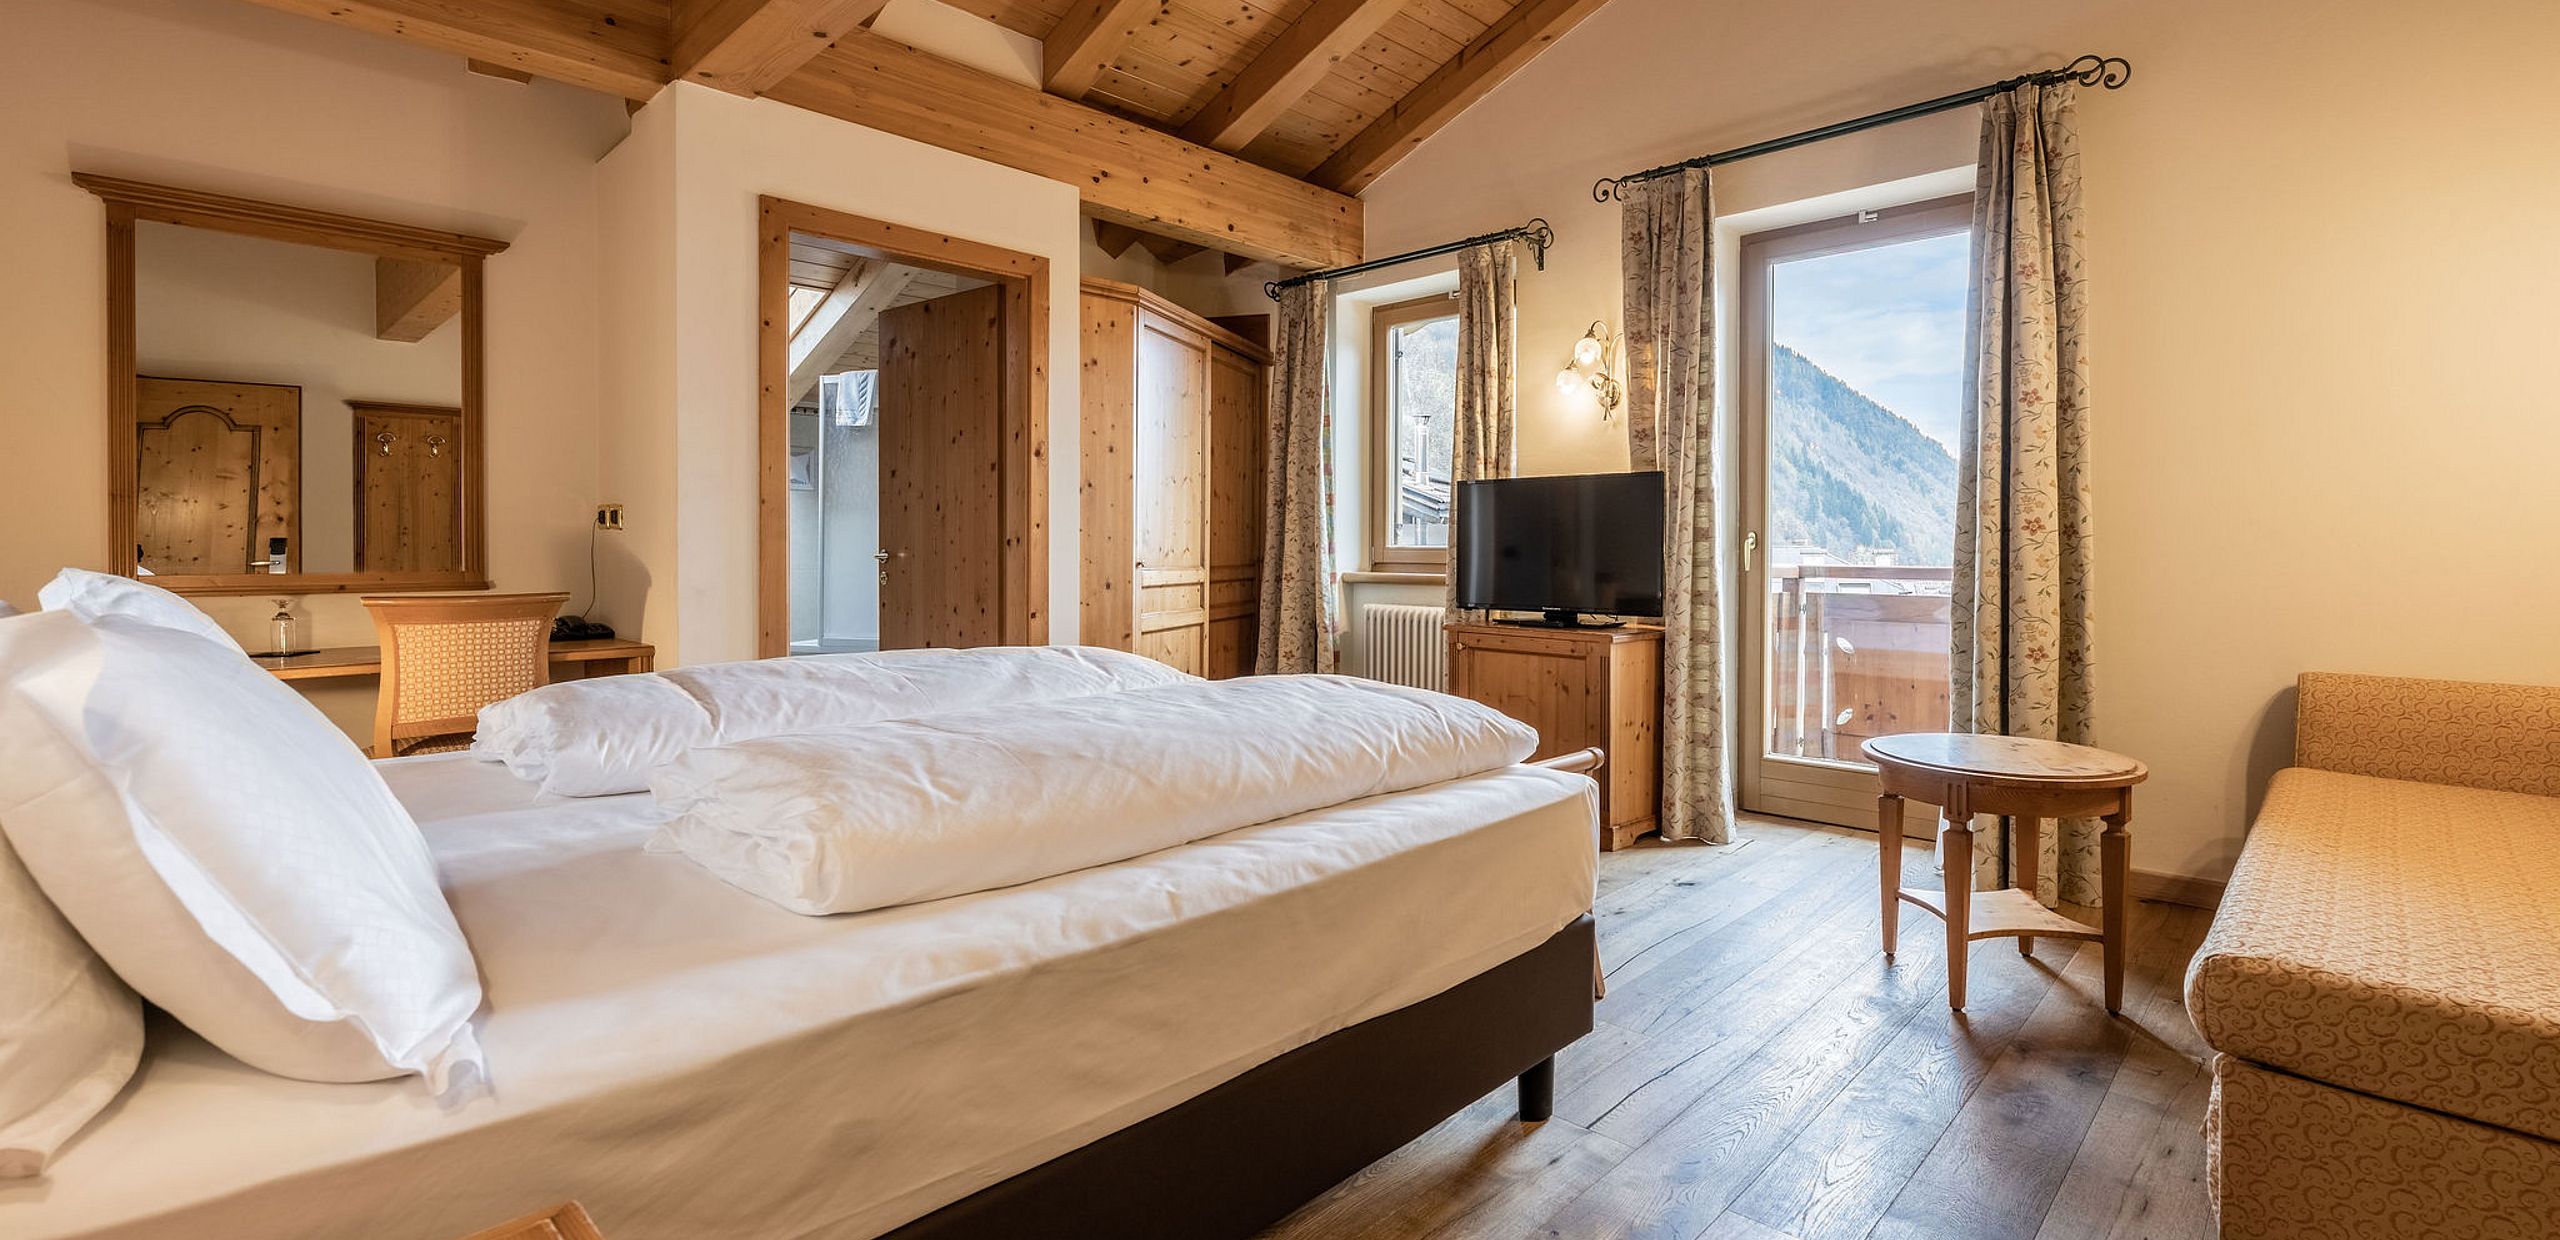 Rooms, suites & lodges - your mountain getaway Trentino